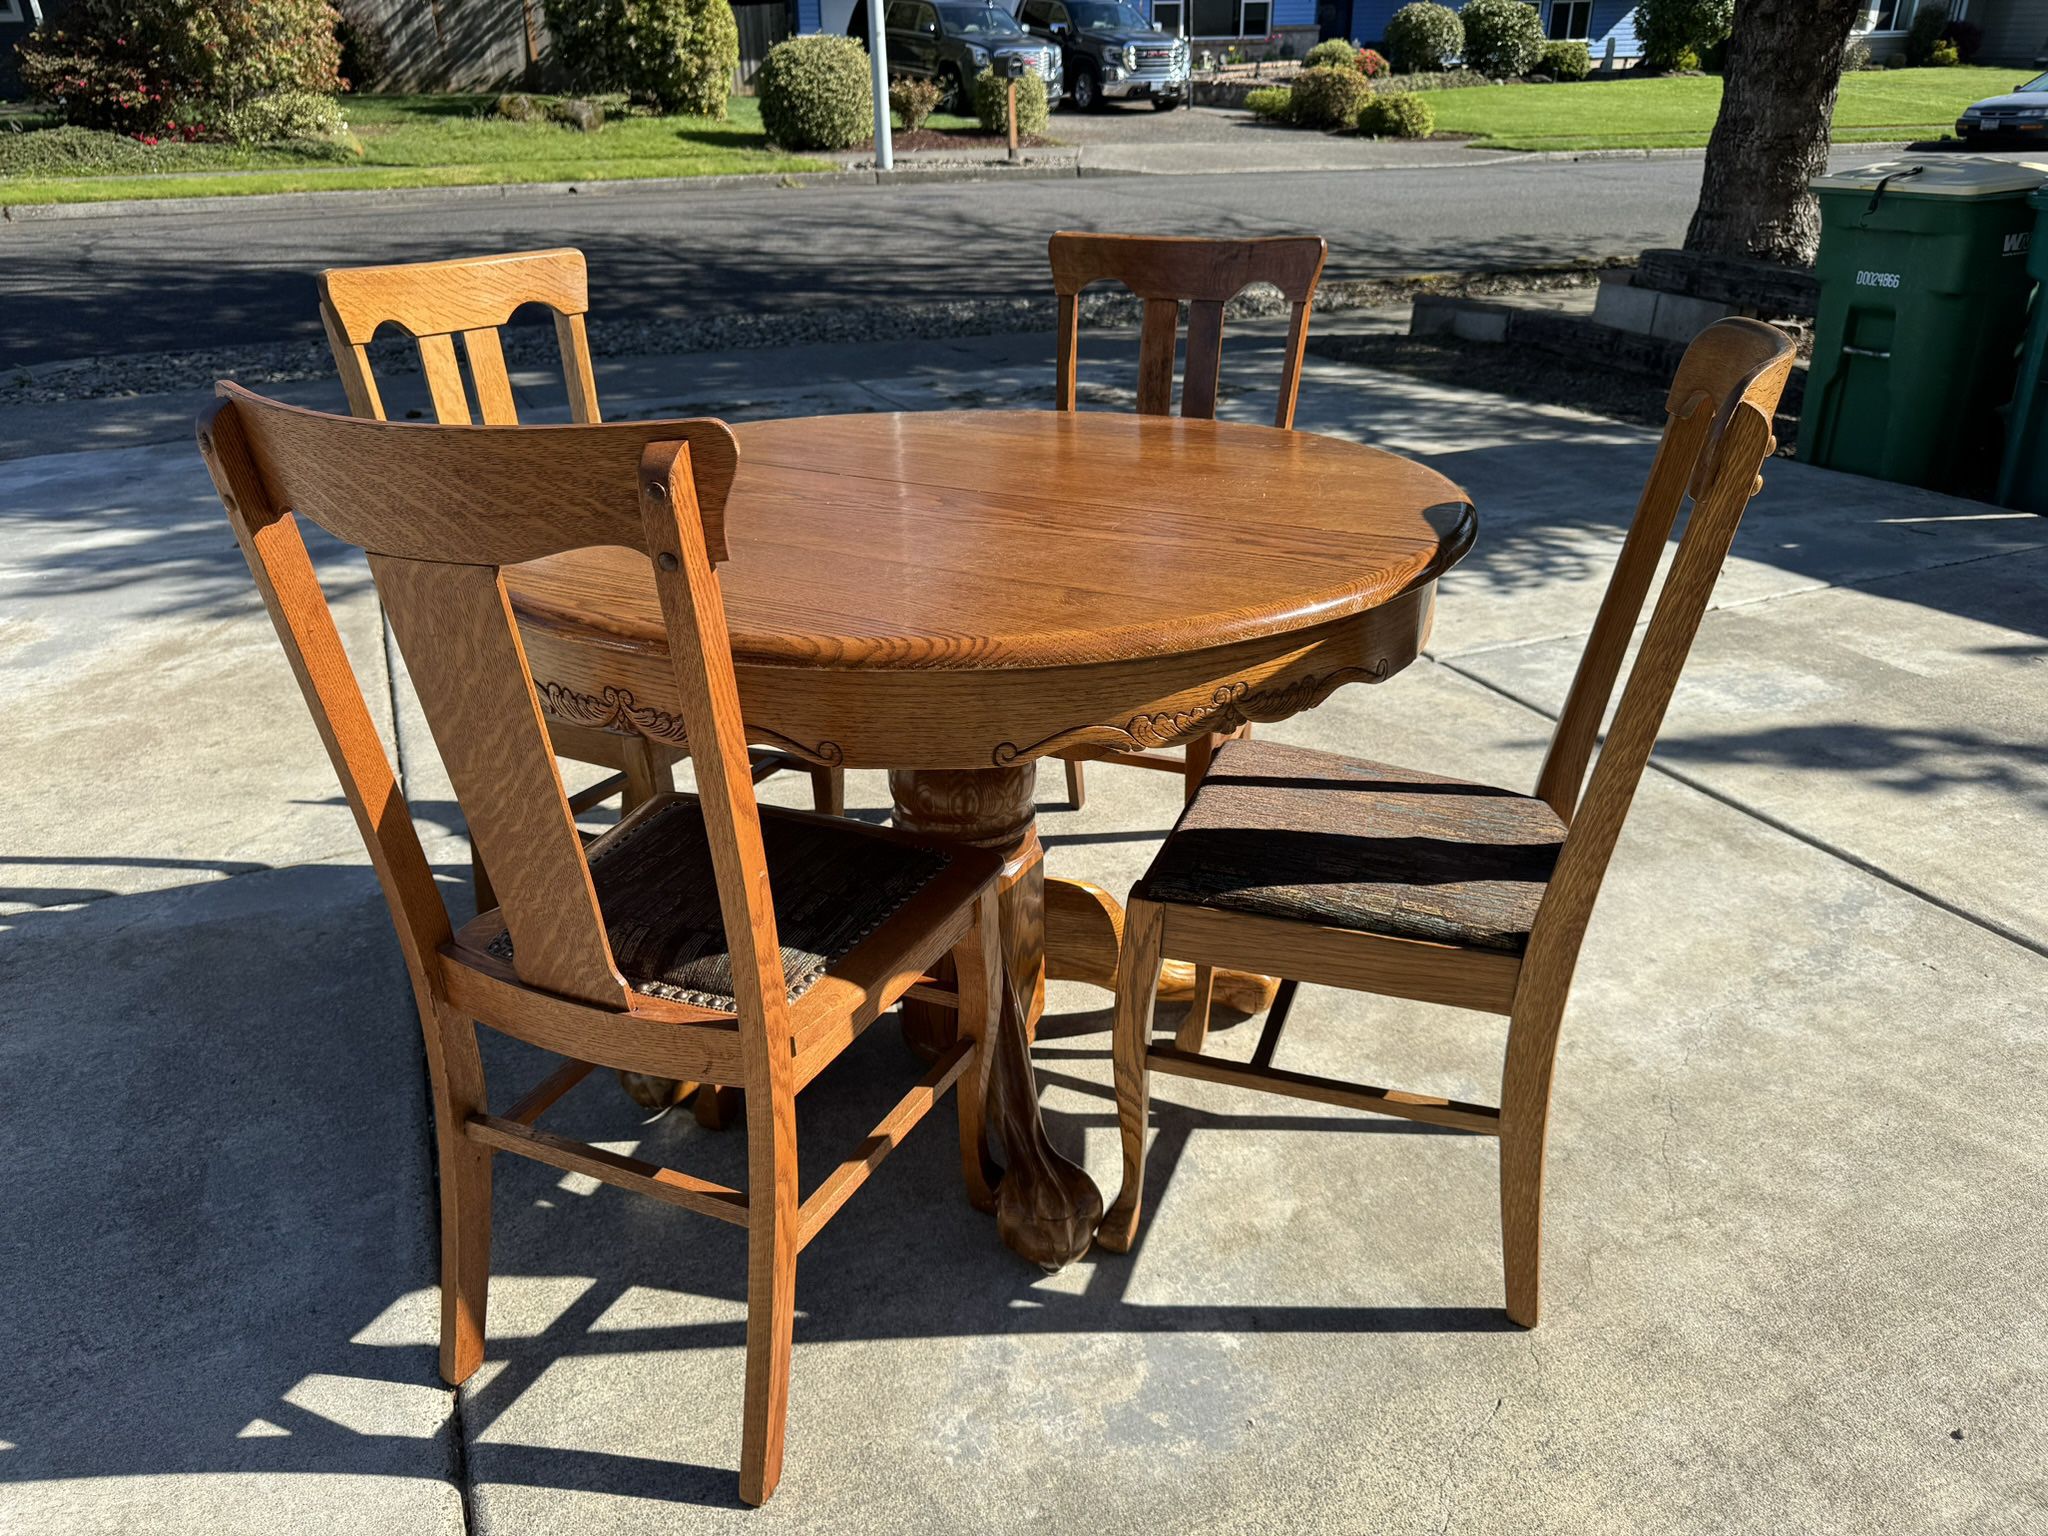 Dinner table with Antique Chairs & Center Leaf. 